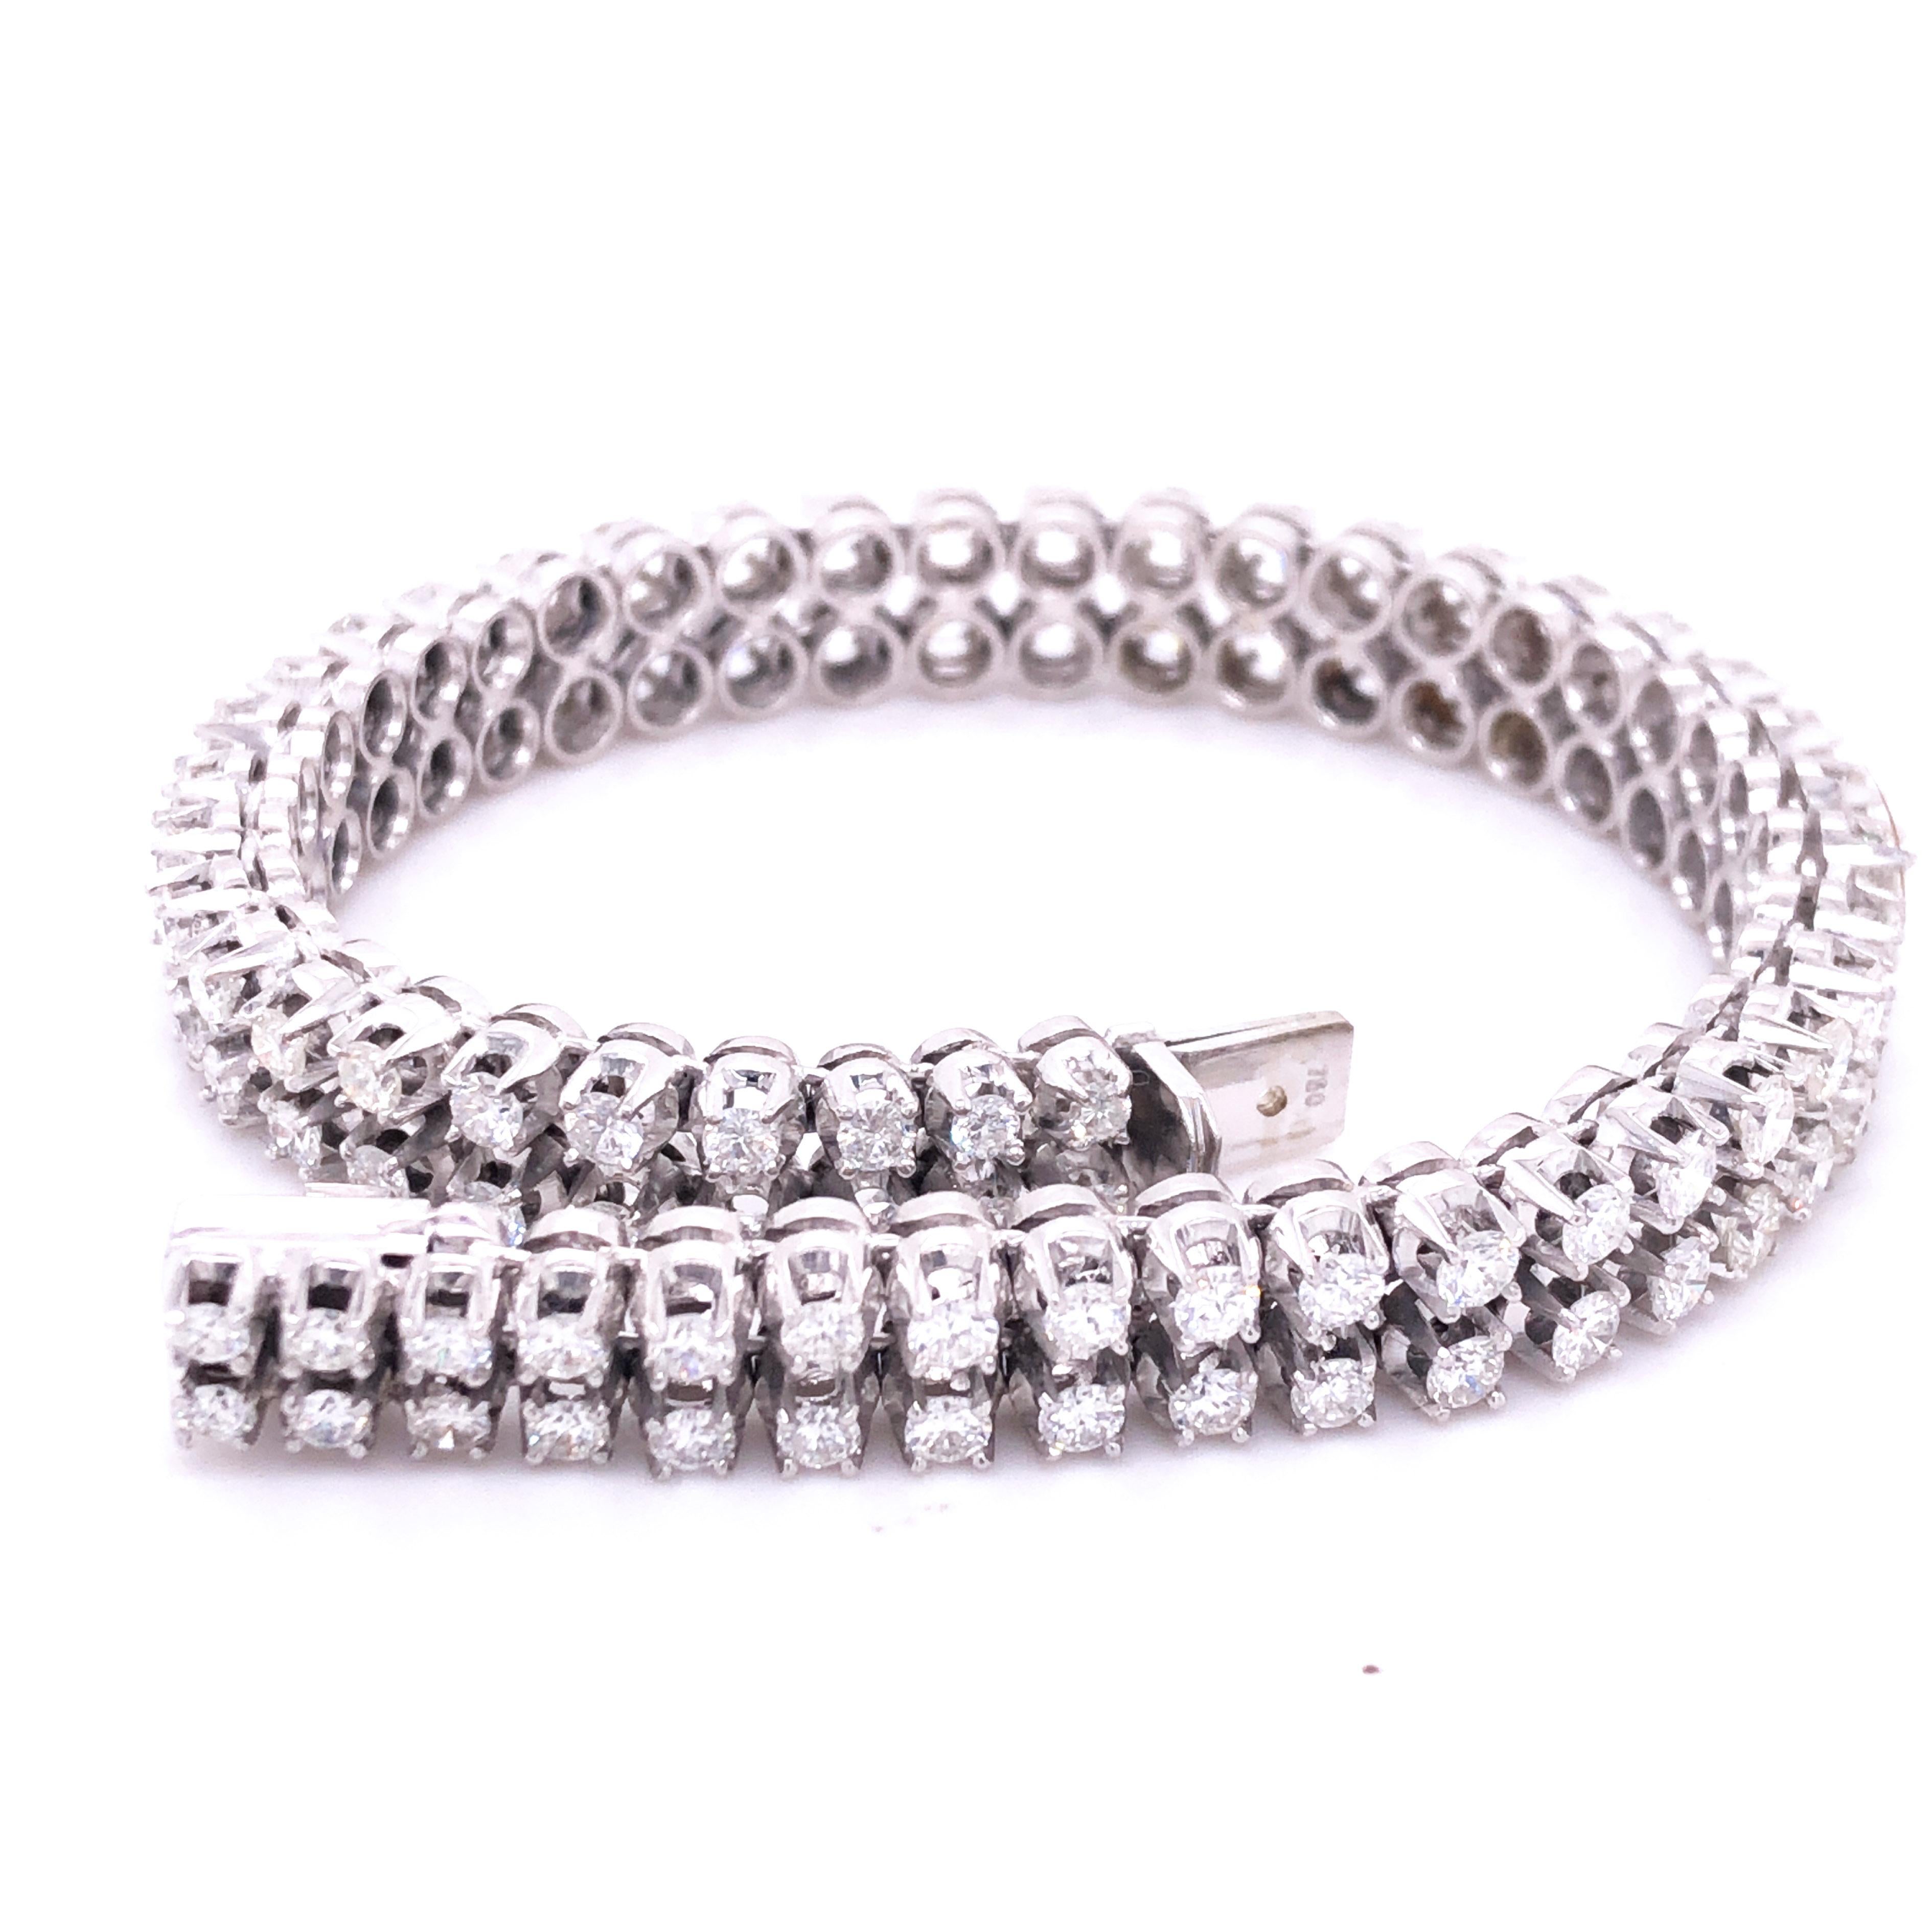 One-of-a-kind, Timeless, Two Lines Tennis Bracelet featuring 98 Brilliant Cut Top Quality White Diamond, total weight 6.41 kt, 0.82 OzT, 24.5grams, 18kt White Gold Handcrafted Setting.
Diamond's Quality is E-F VvS1.
Total Lenght 7.1 inches, 18cm 
In